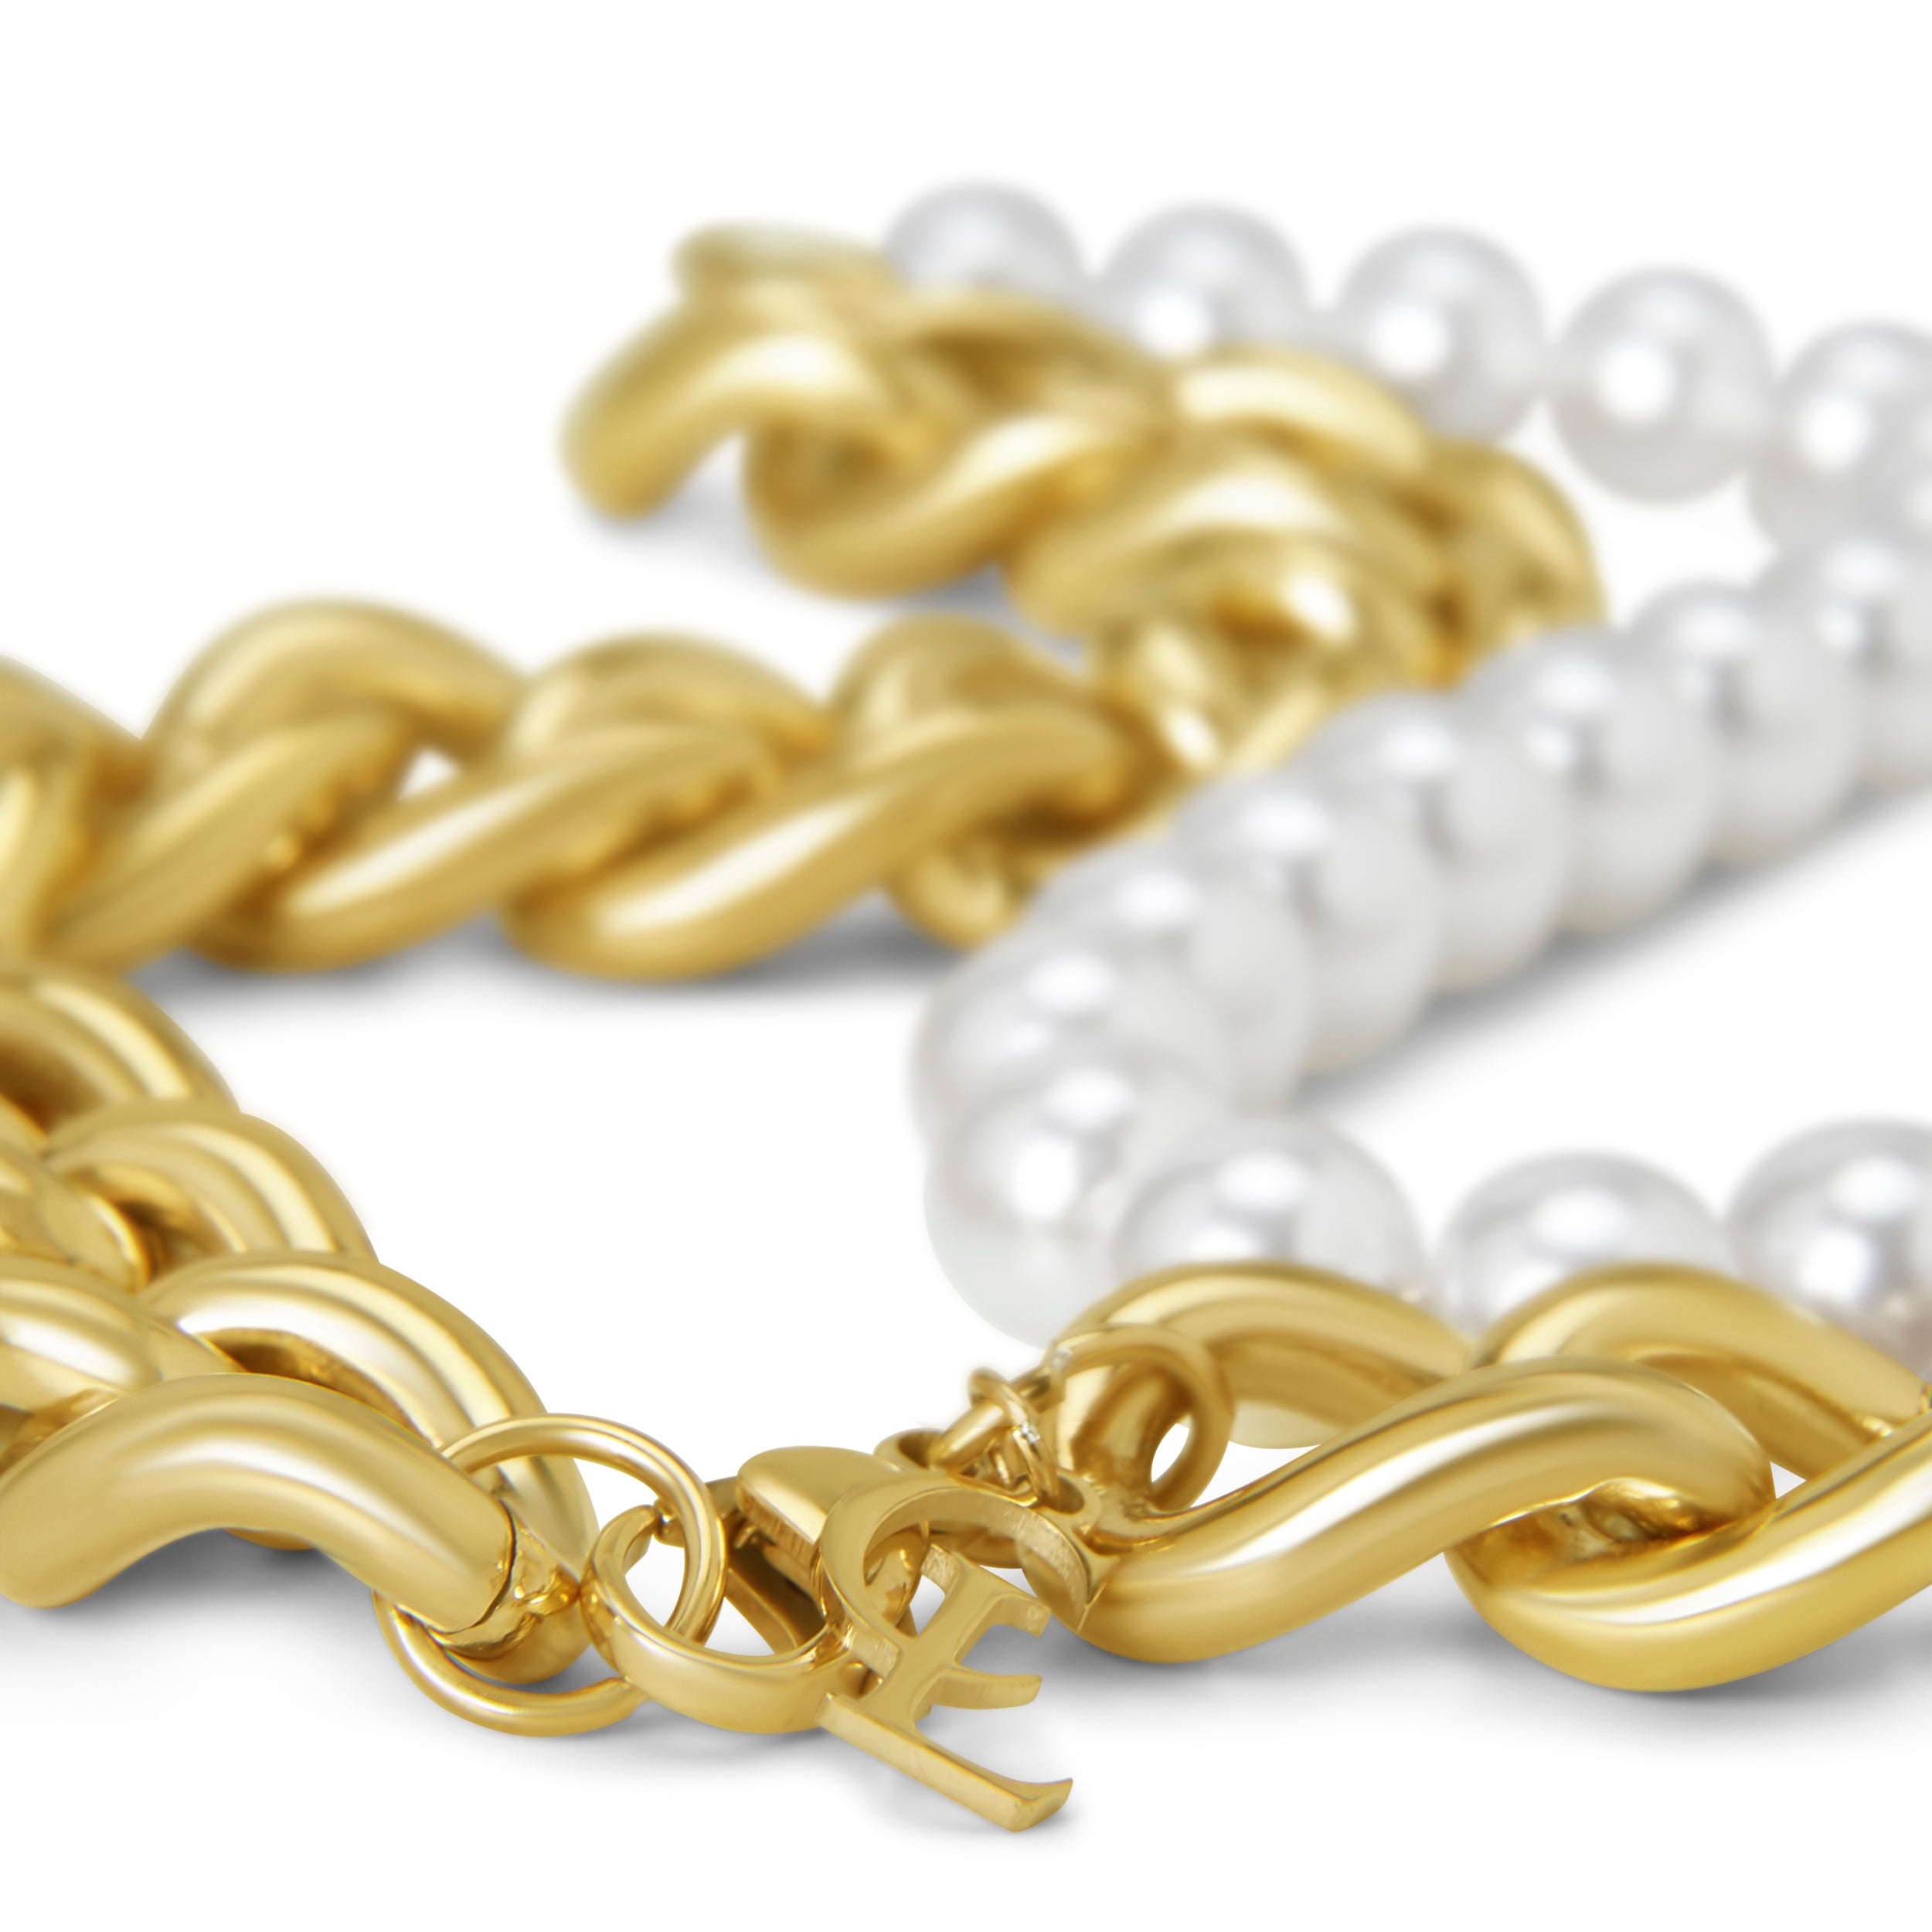 The Pearls (Gold)